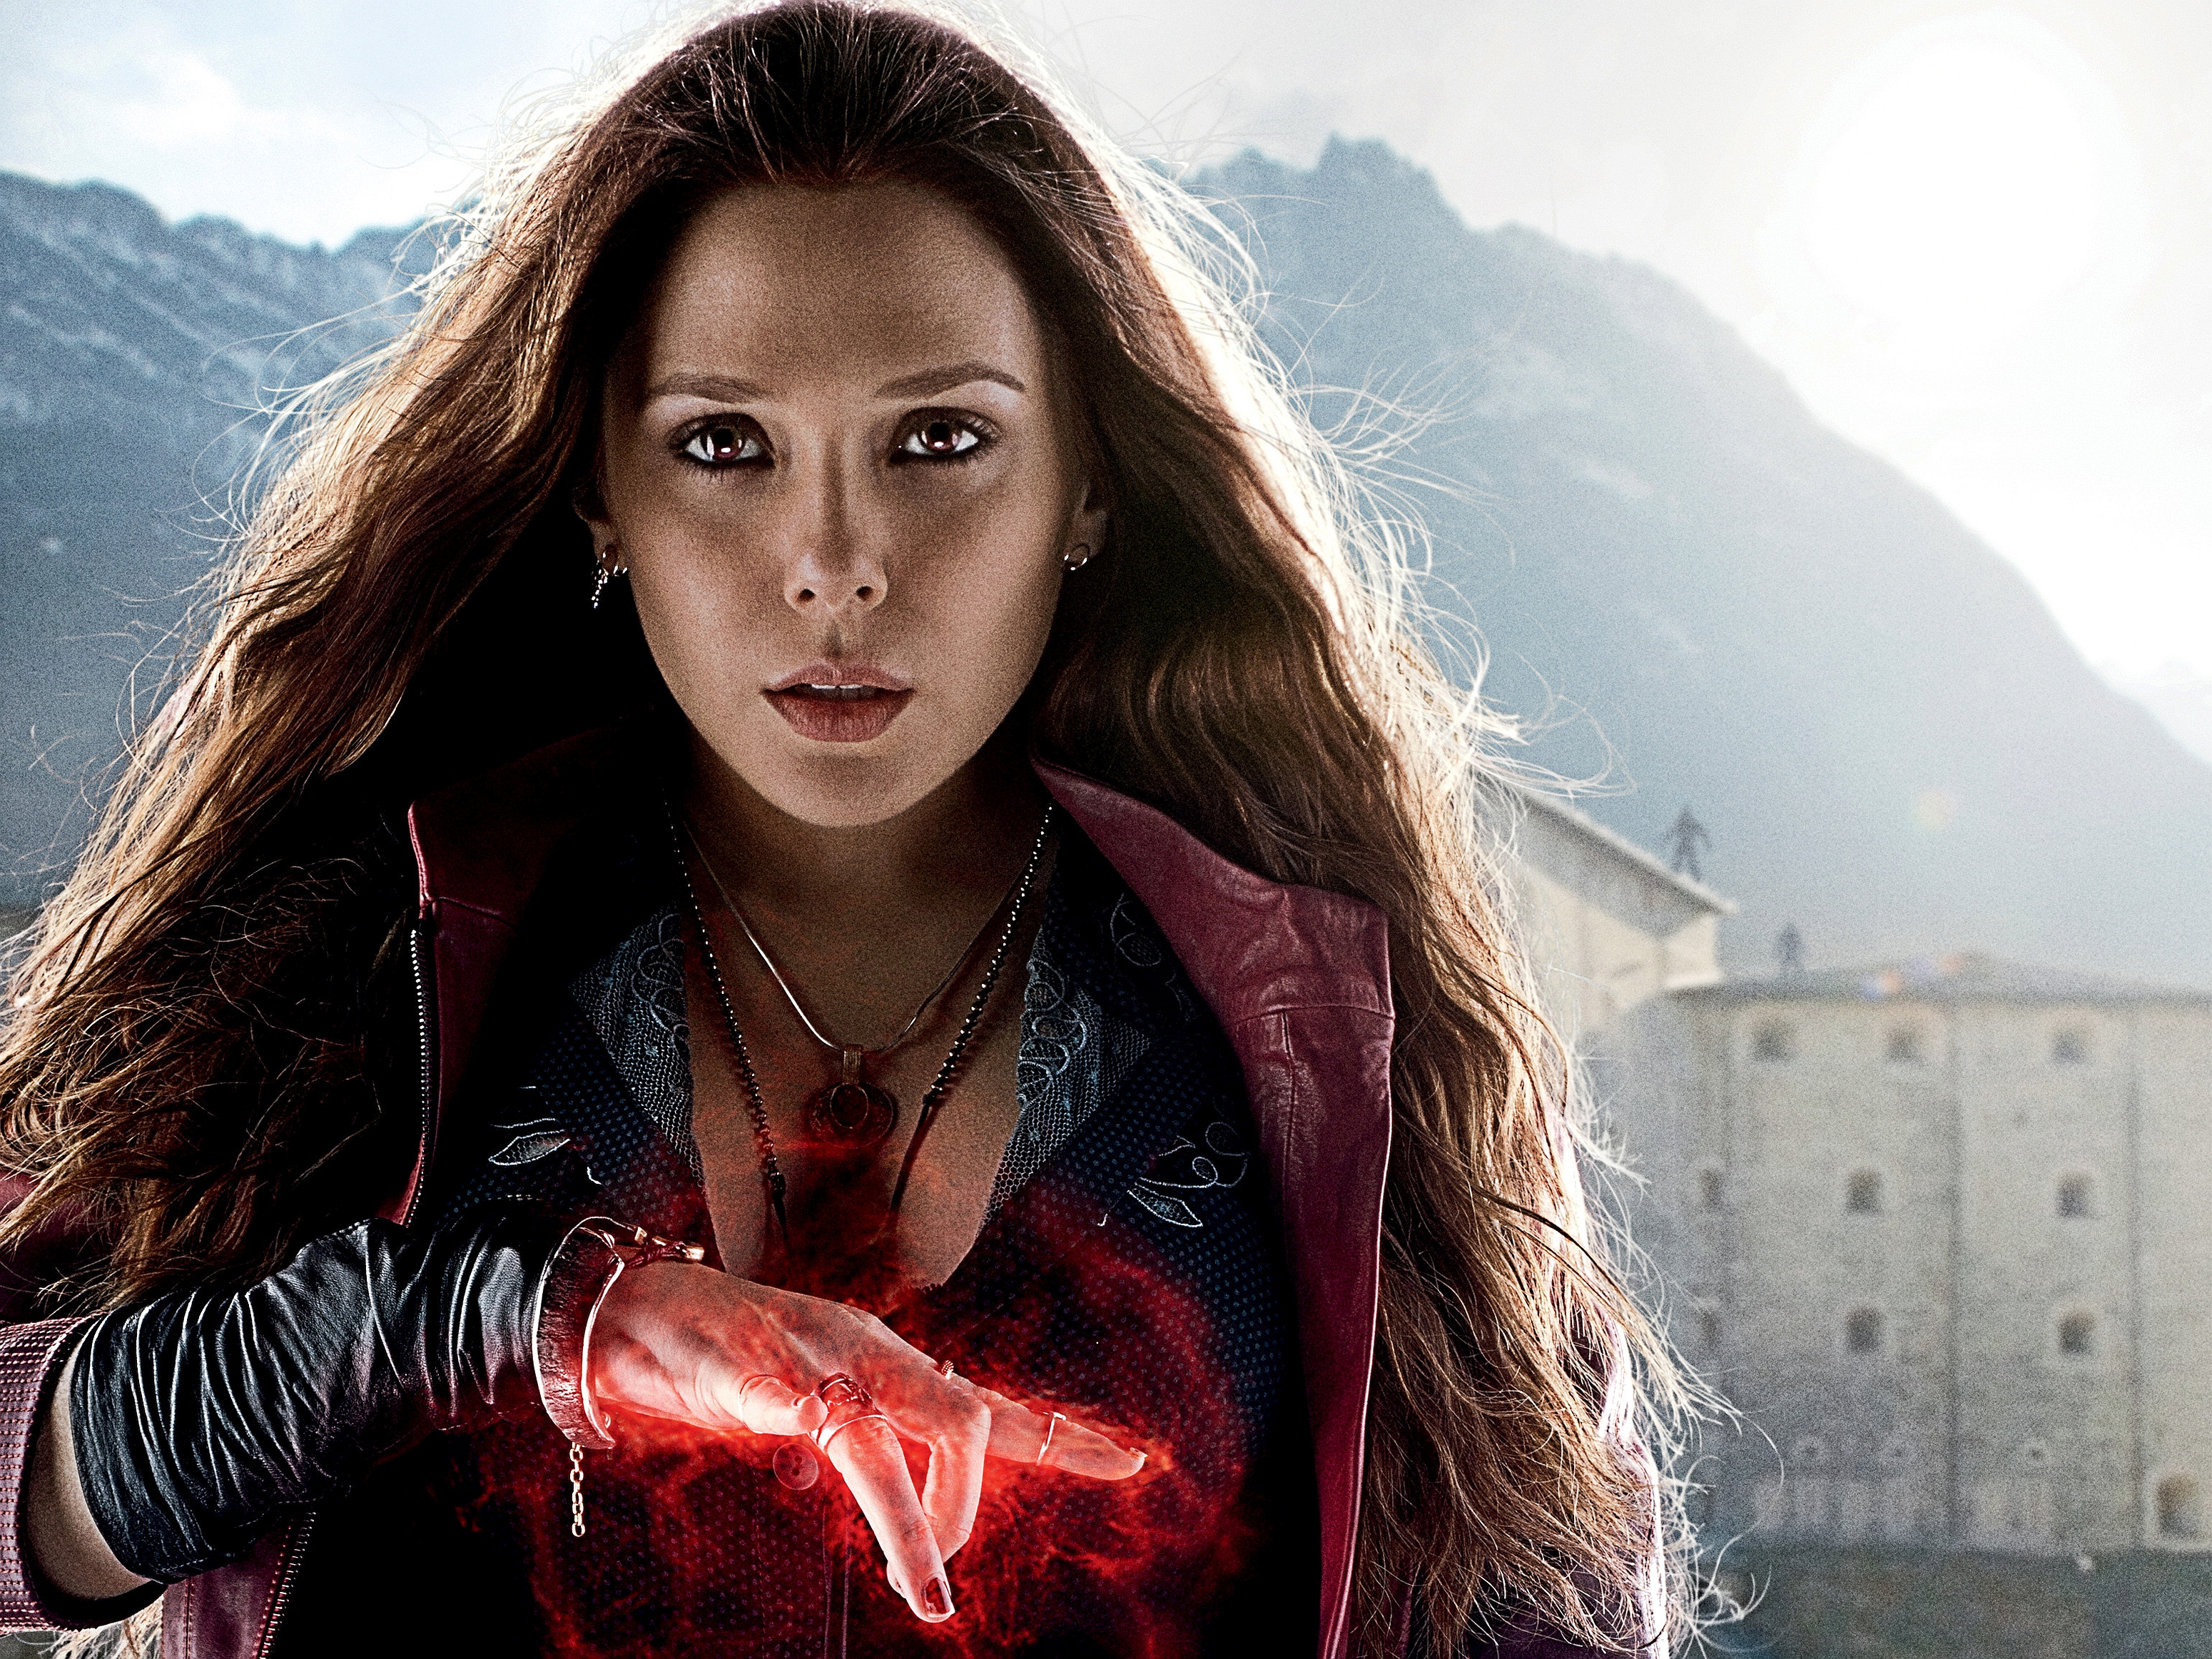 actress, elizabeth olsen, scarlet witch, movie, avengers: age of ultron, american, brunette, the avengers